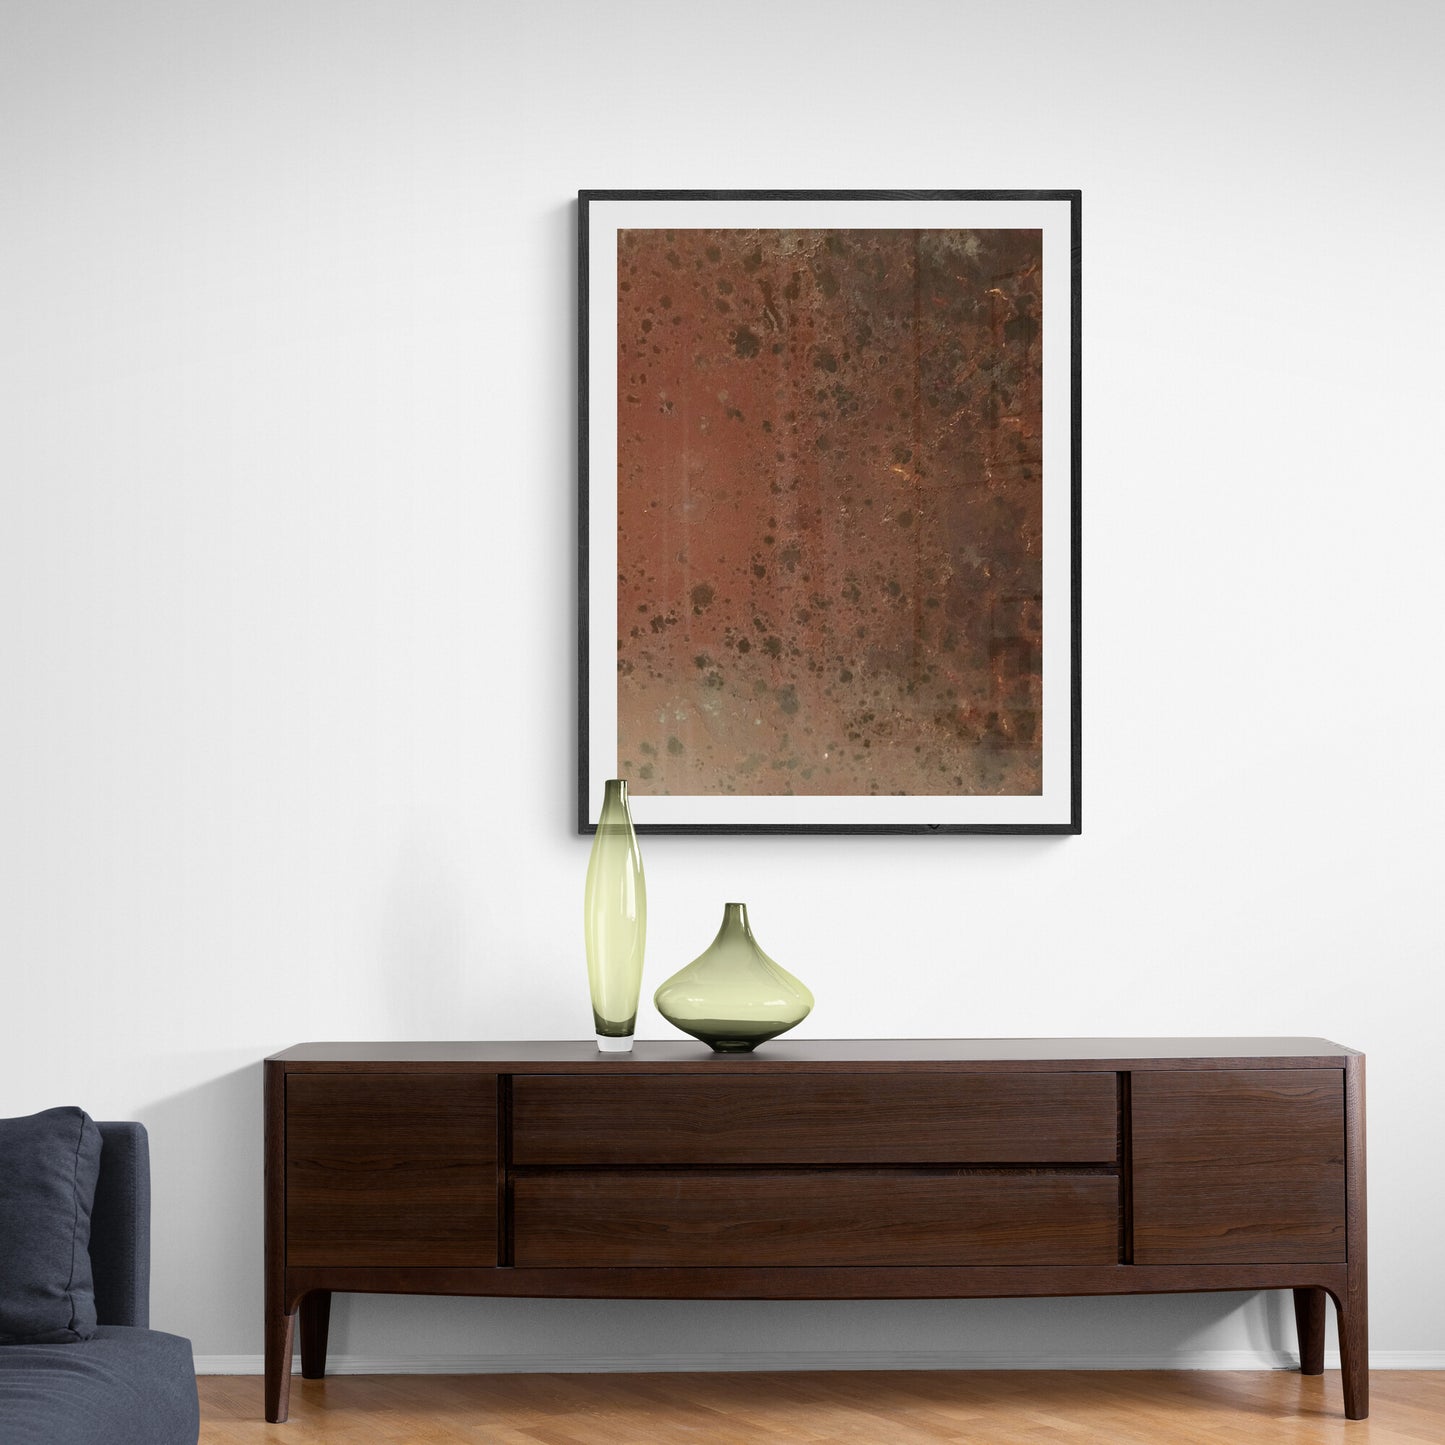 "Patina", Metallic Spots, Indusrial Style Print, Rustic Abstract Photo